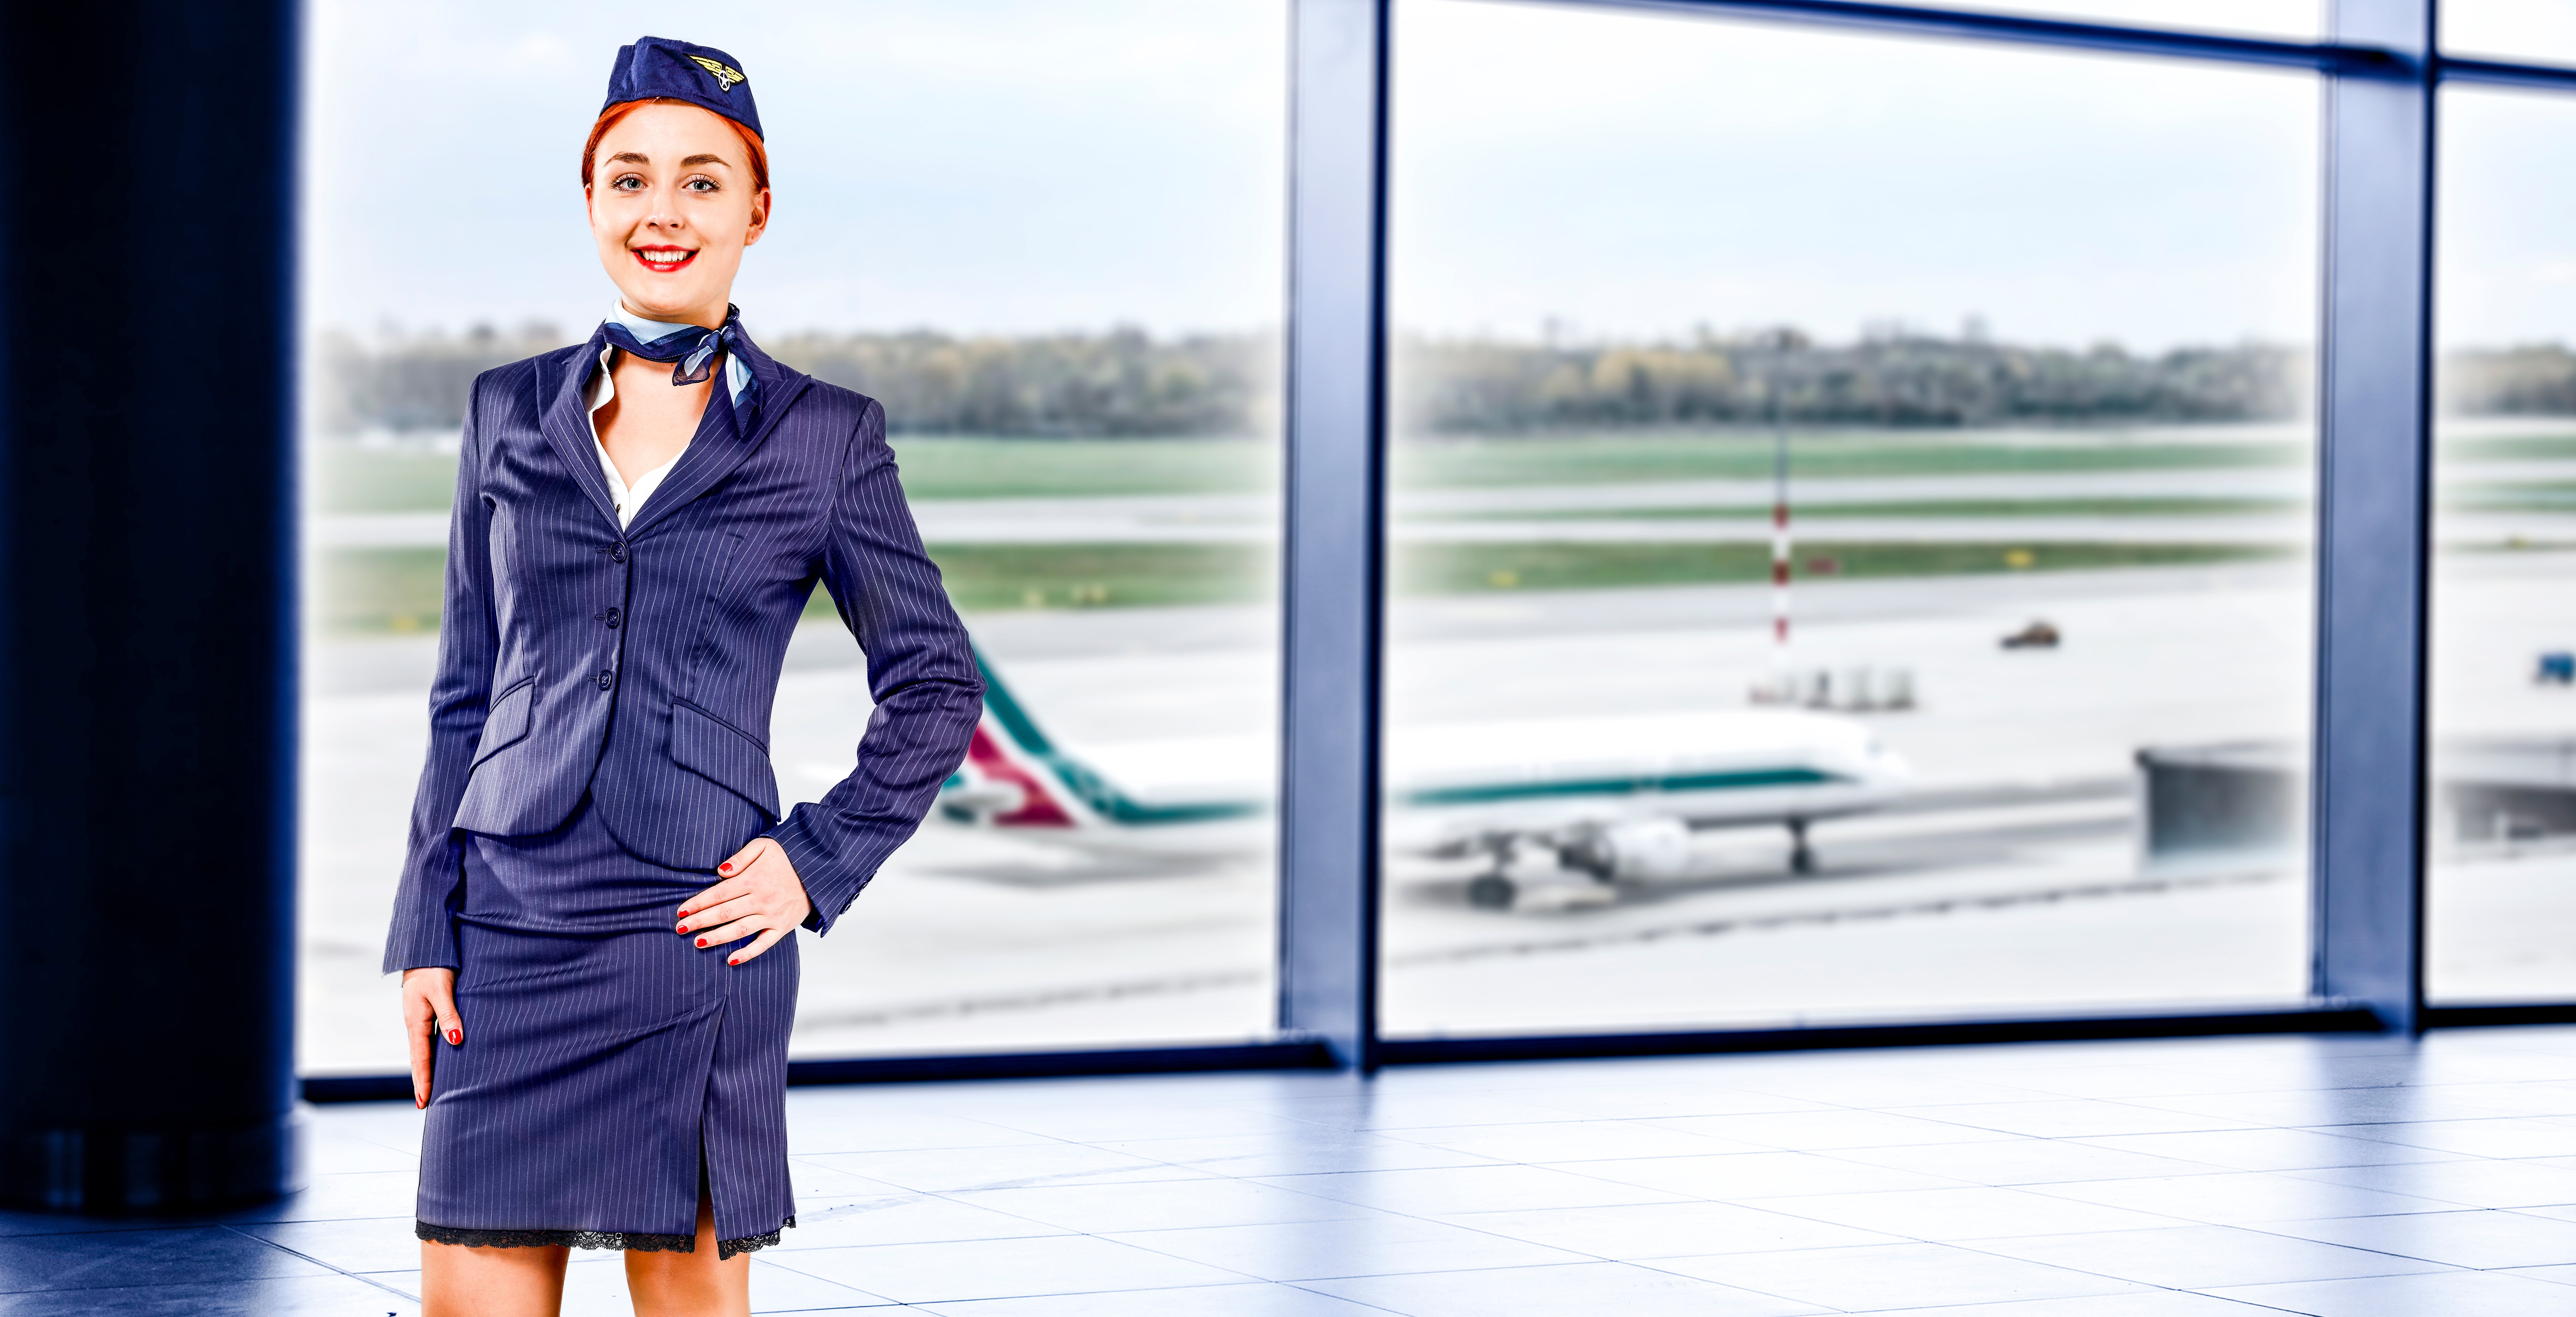 Emirates Flight Attendant Salary and Career Outlook